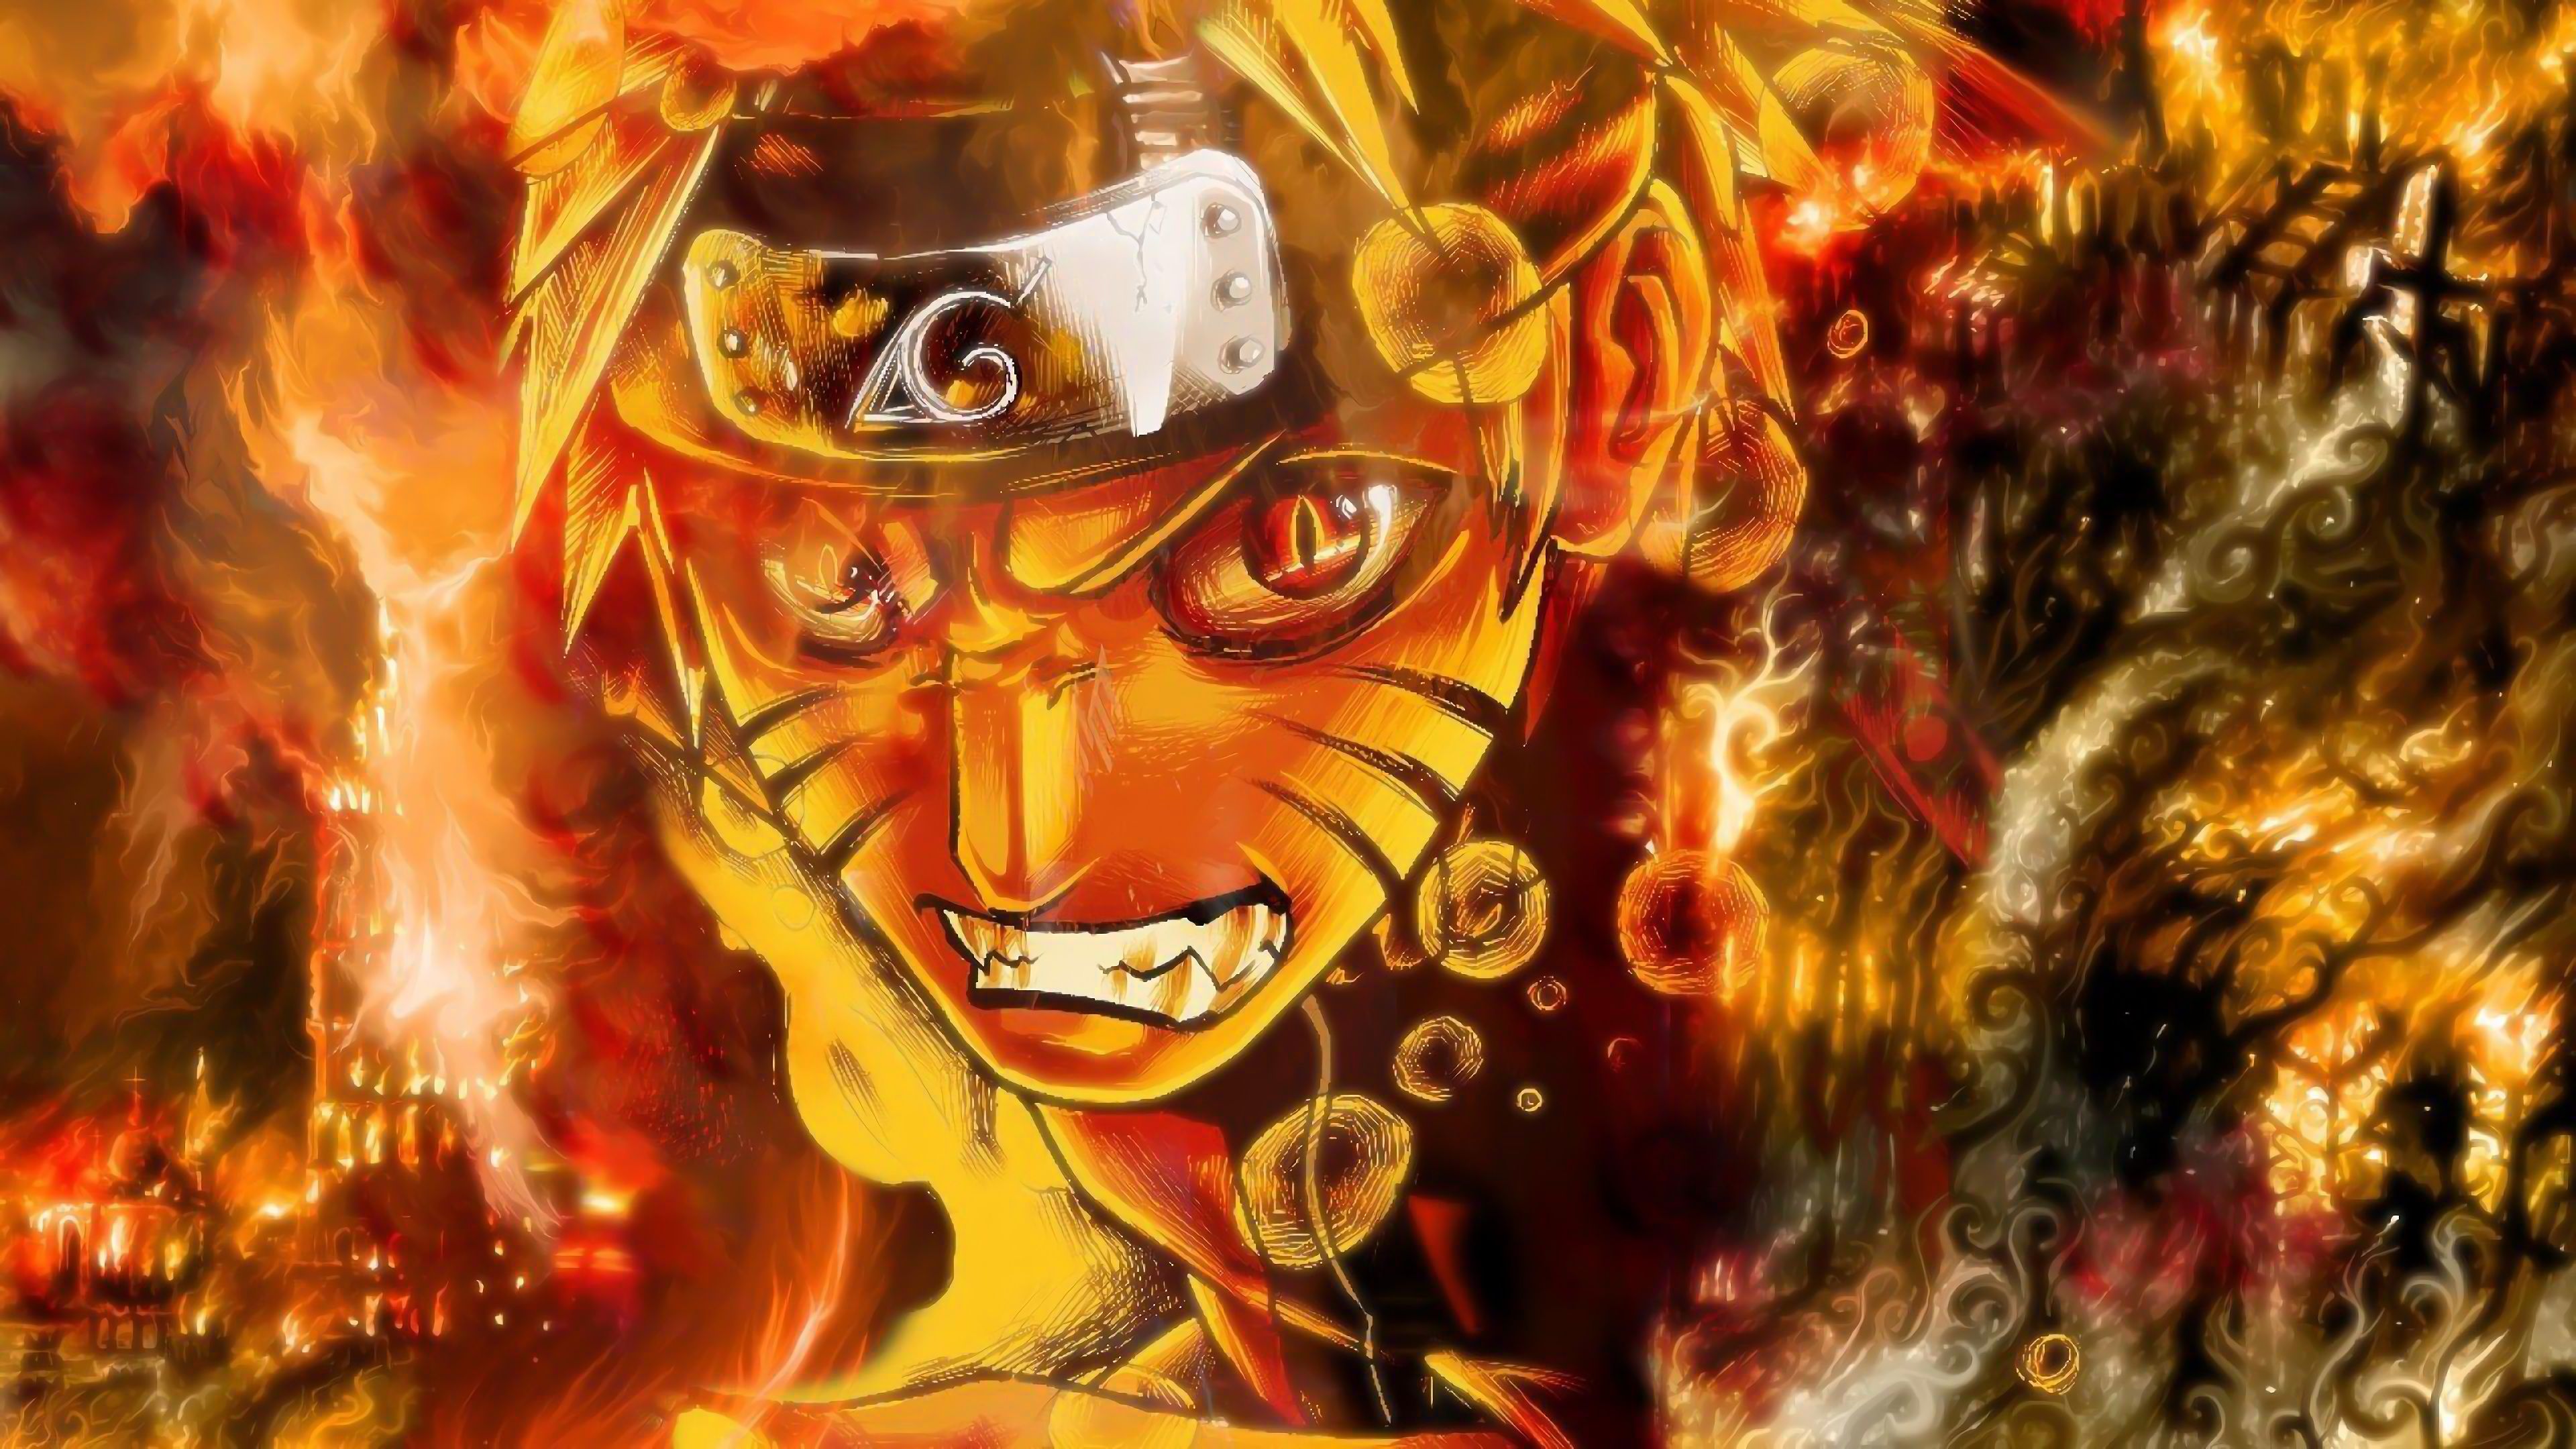 71+ 4K Naruto Wallpapers: HD, 4K, 5K for PC and Mobile